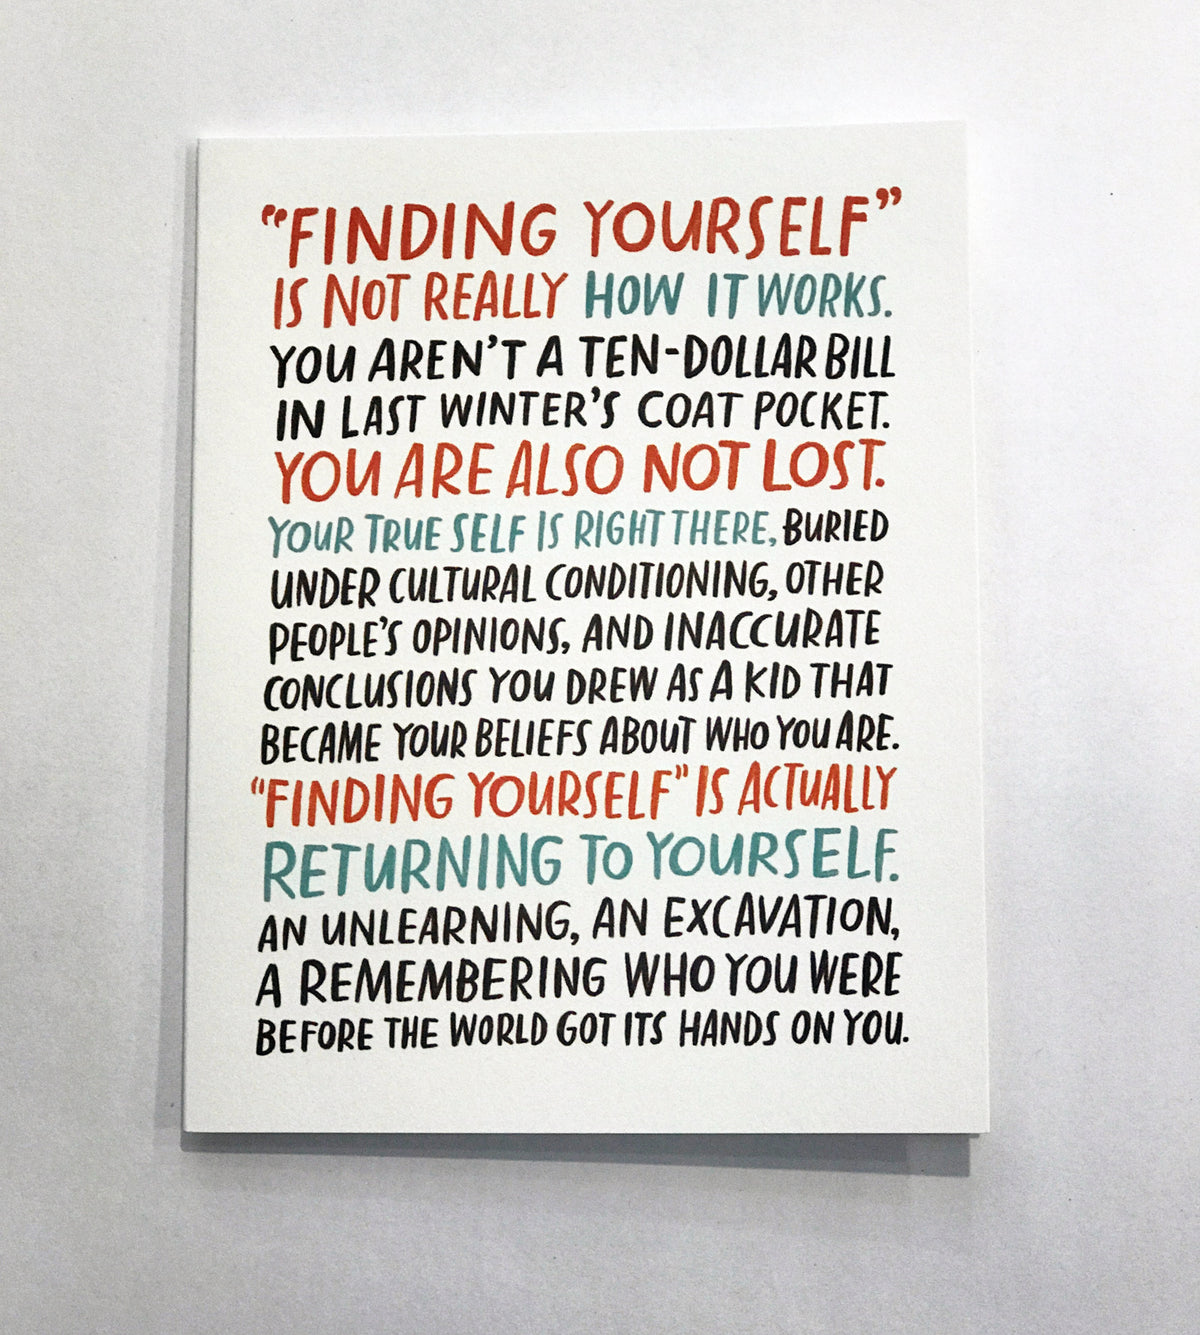 Greeting card on white background. It says &quot;Finding Yourself is not really how it works. You aren&#39;t a ten-dollar bill in last winter&#39;s coat pocket. You are also not lost. Your true self is right there. Buried under cultural conditioning, other people&#39;s opinions, and inaccurate conclusions you drew as a kid that became your beliefs about who you are. Finding yourself is actually returning to yourself. An unlearning, an excavation, a remembering who you were before the world got its hands on you.&quot; 